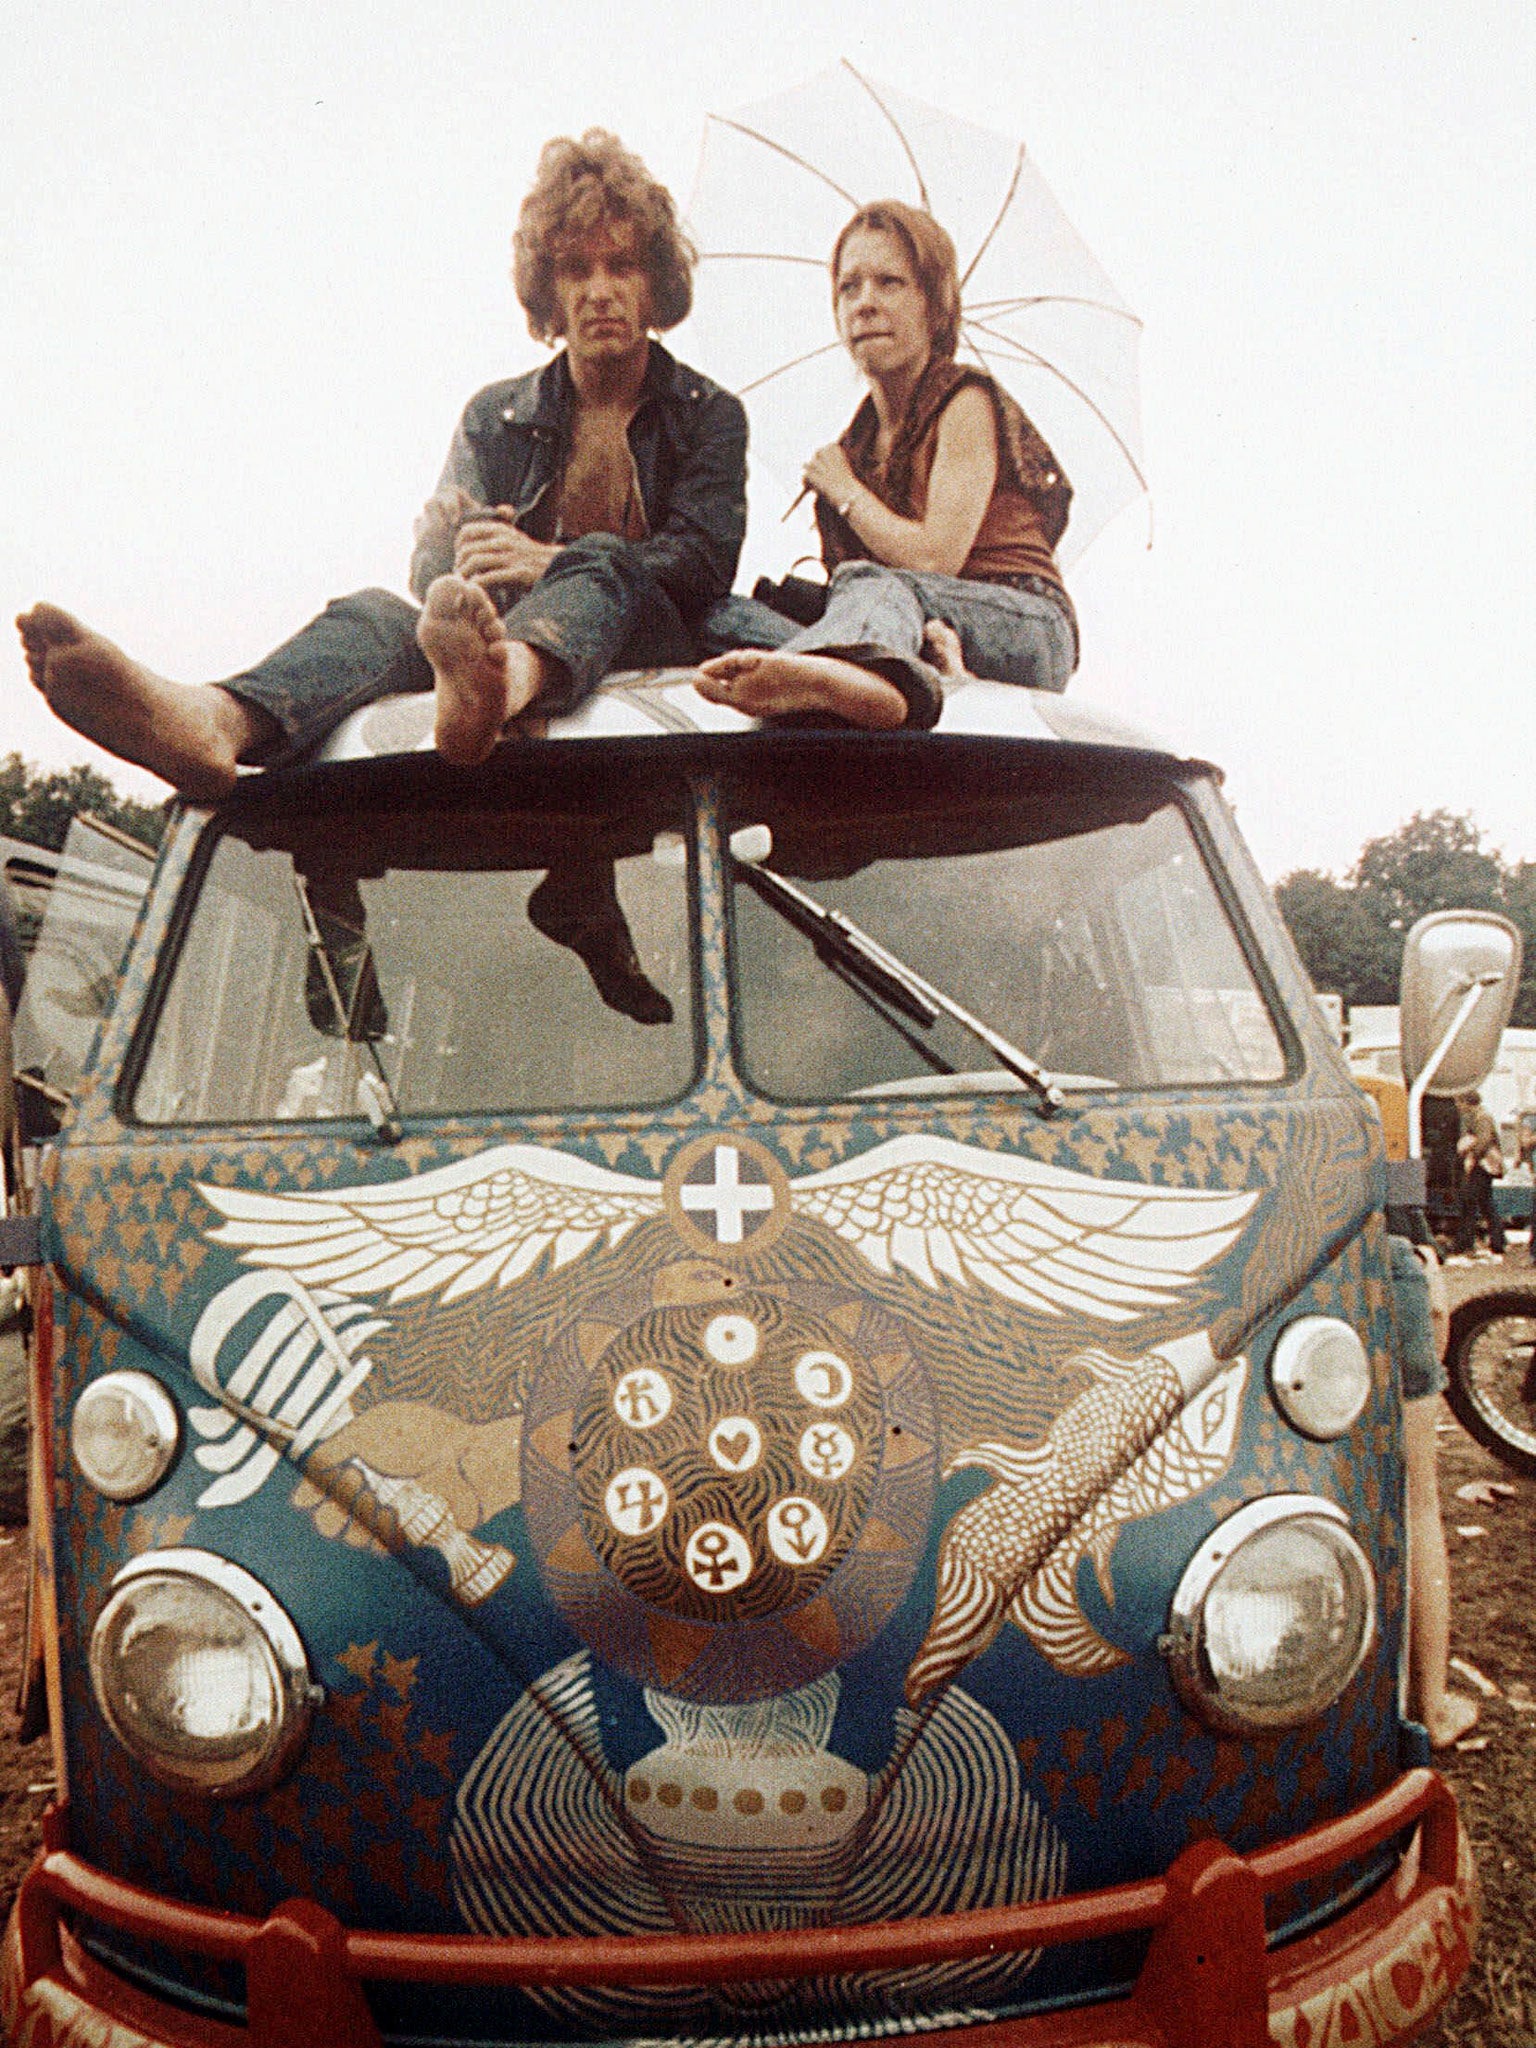 Flower powered: concertgoers at Woodstock in 1969